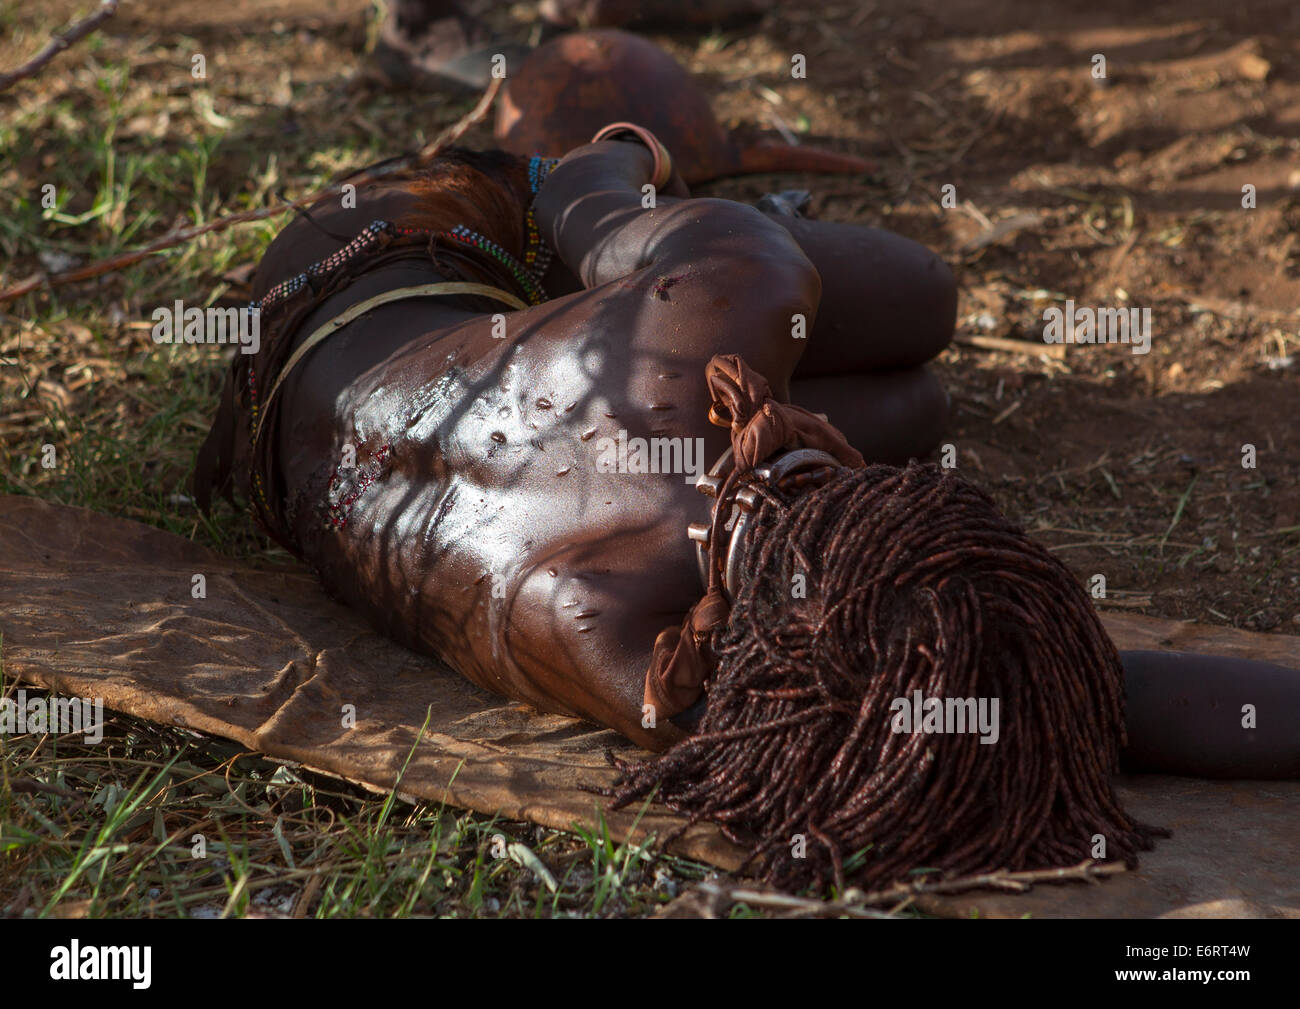 Bashada Tribe Woman Whipped During A Bull Jumping Ceremony, Dimeka, Omo Valley, Ethiopia Stock Photo